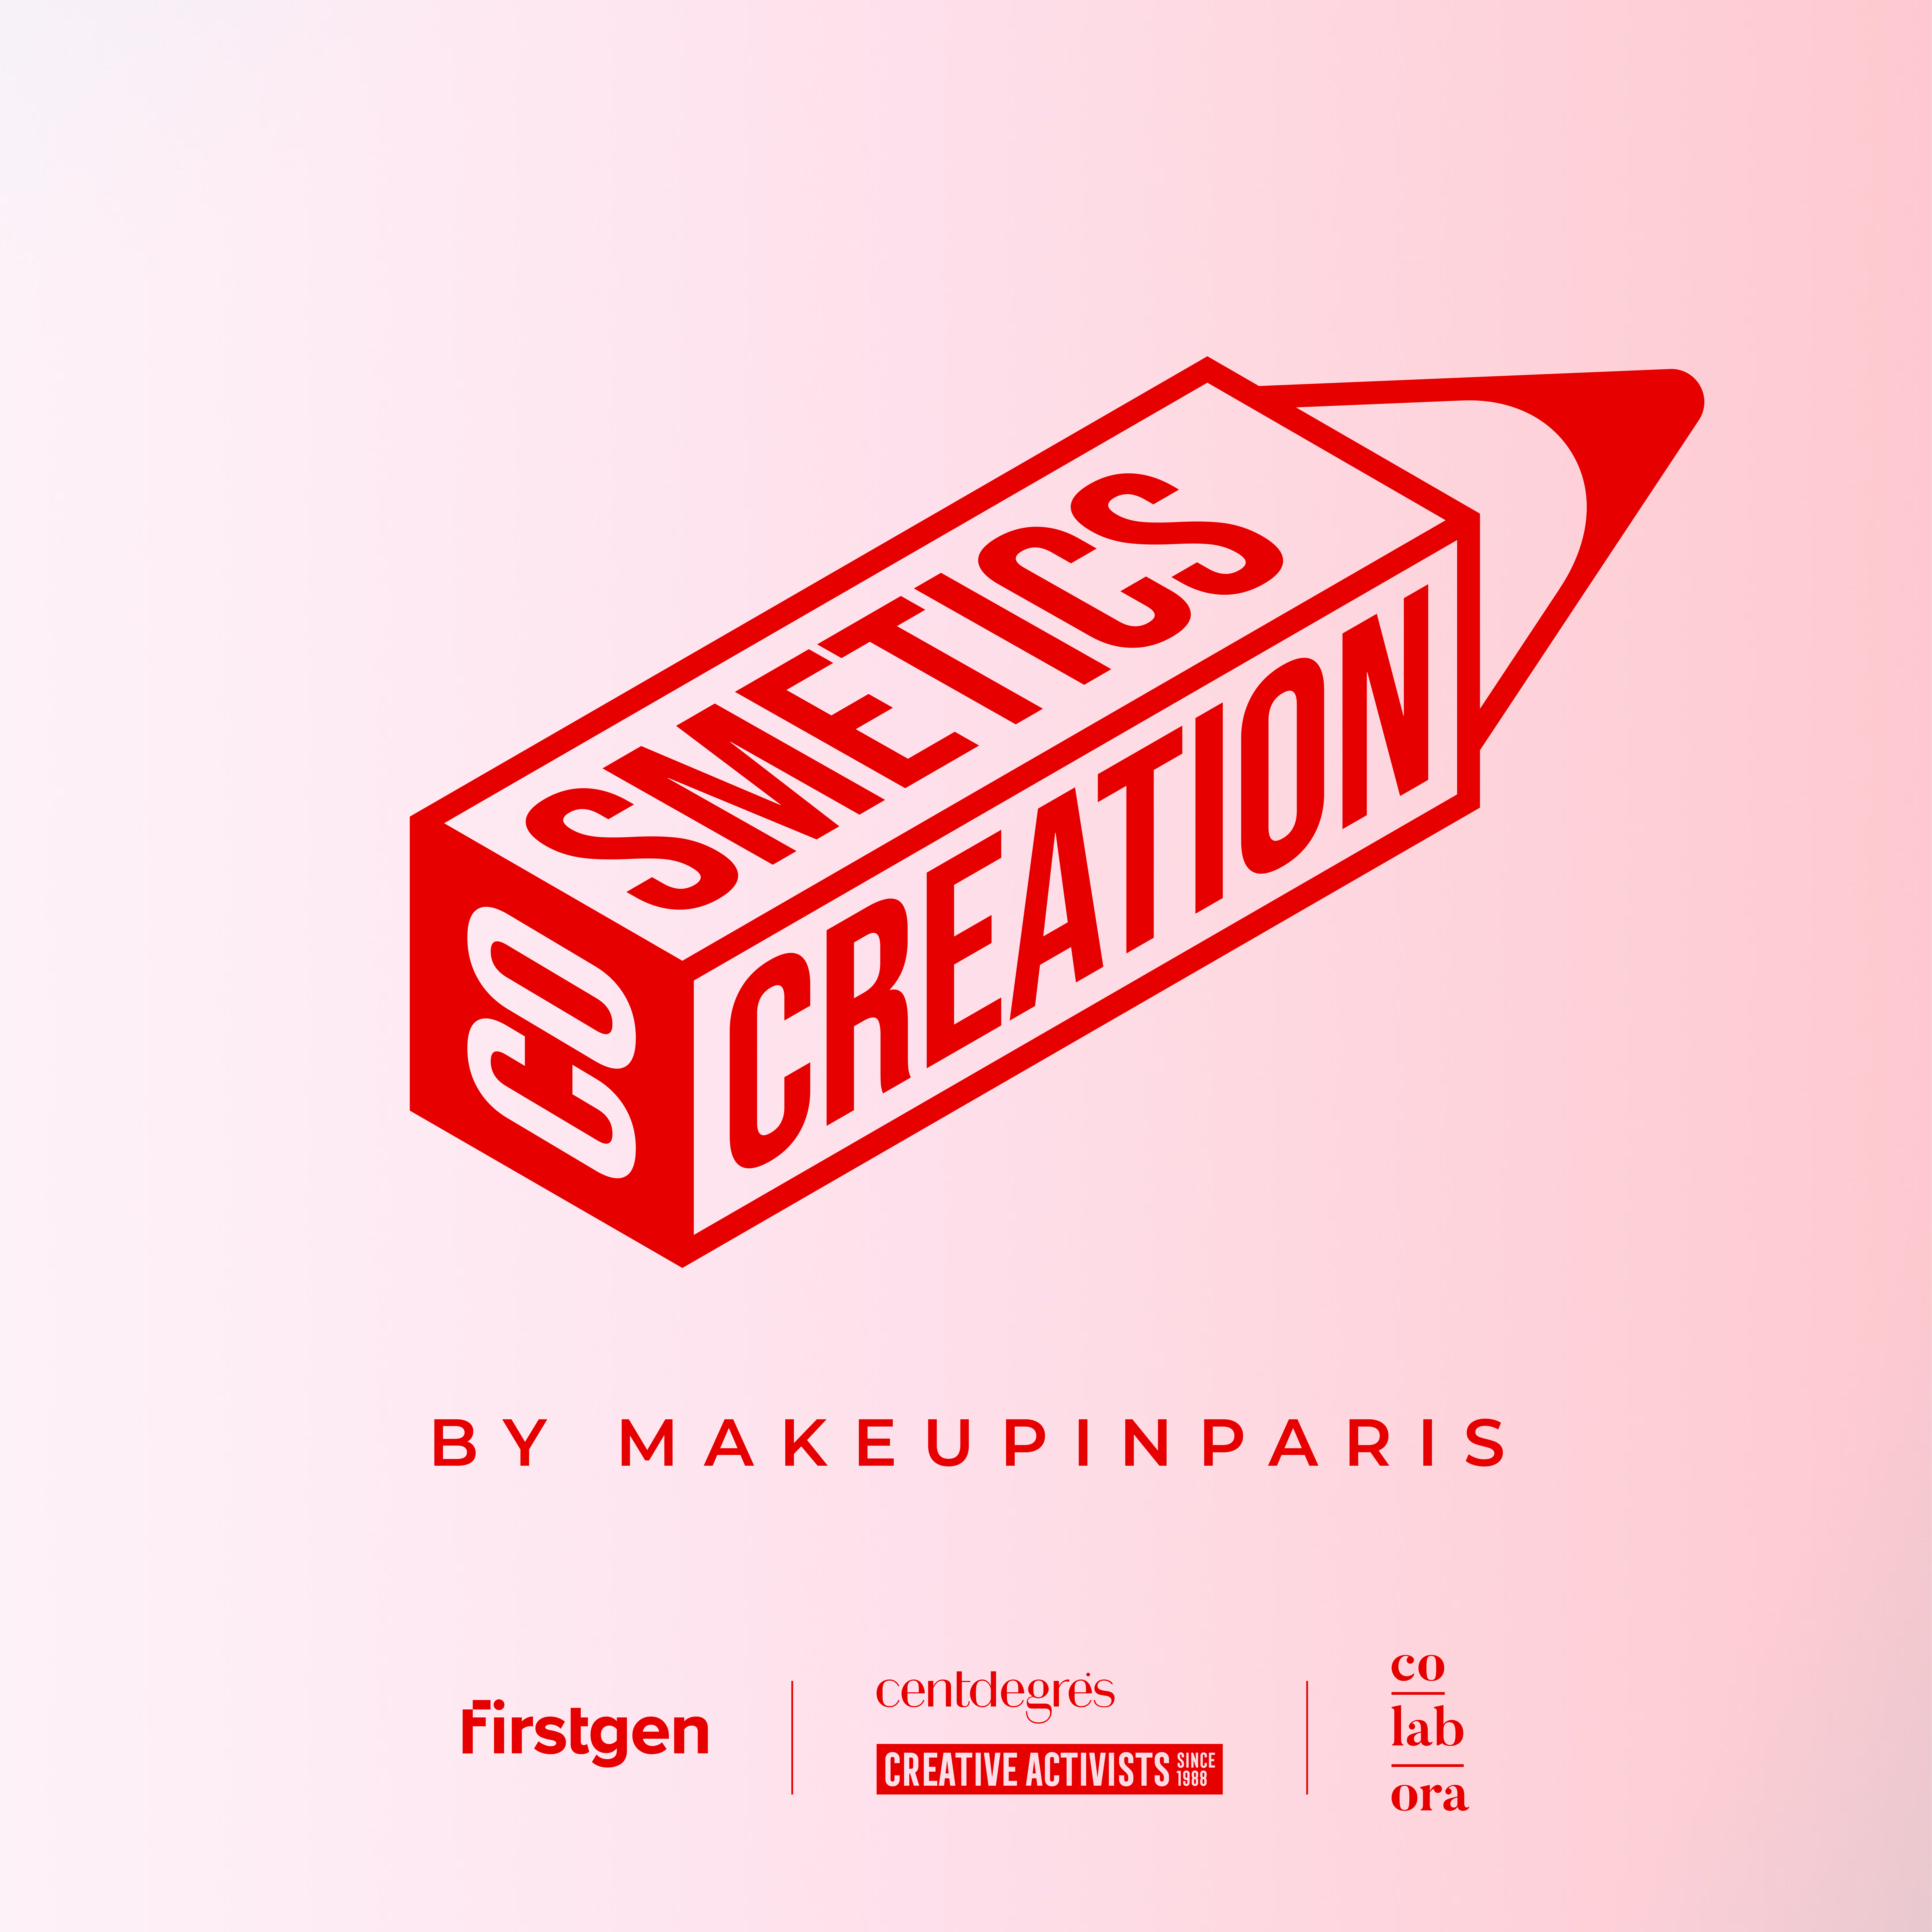 Cosmetic Co Creation – Makeup In